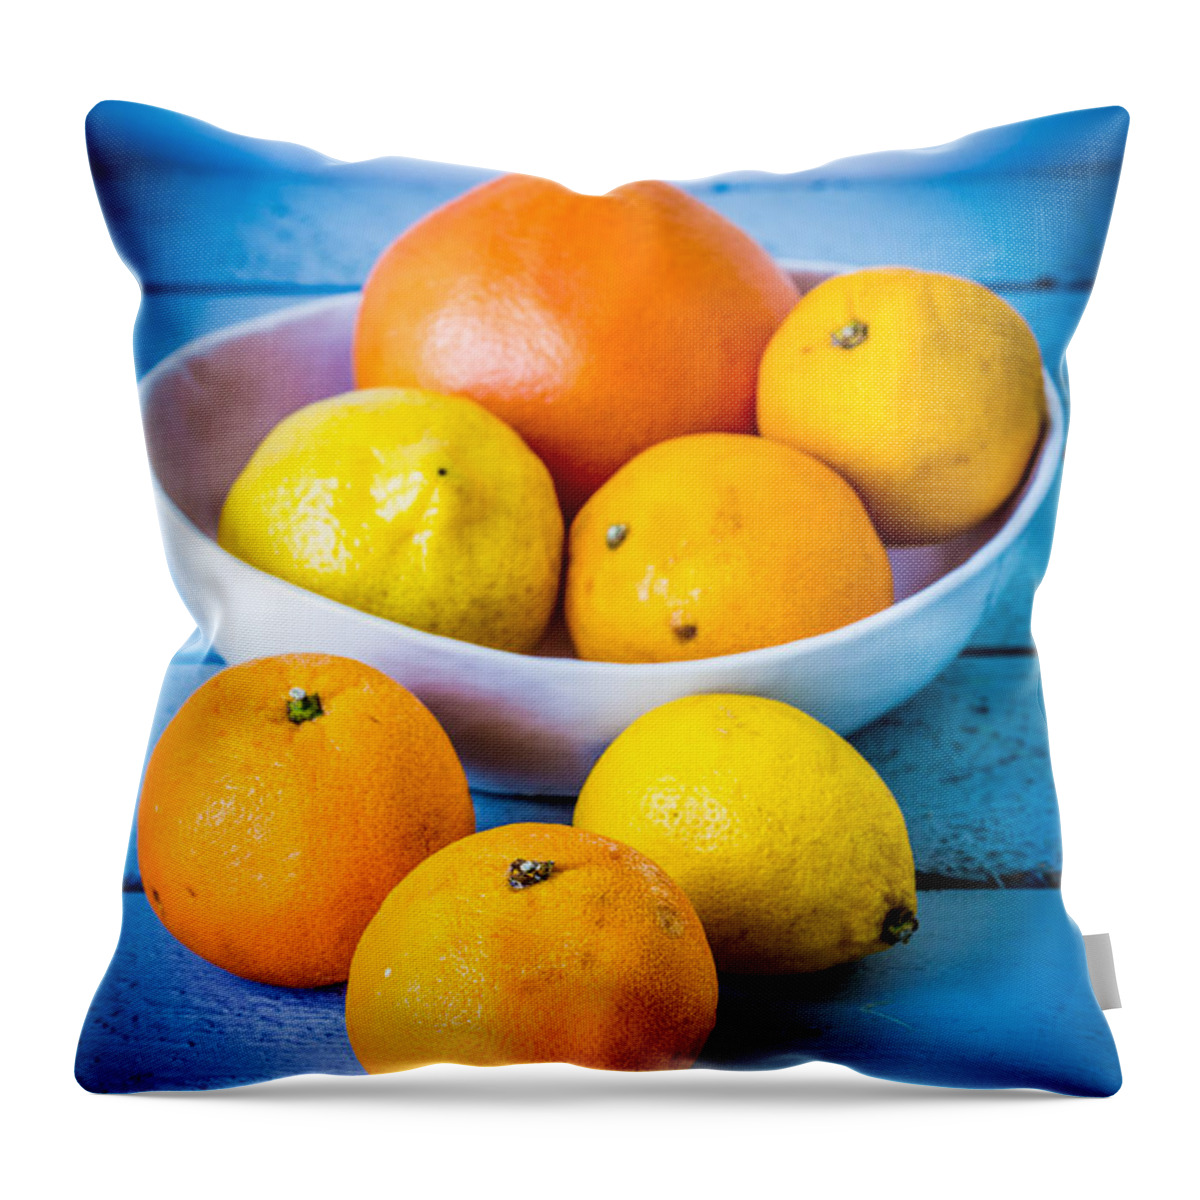 Citrus Fruit Throw Pillow featuring the photograph Assorted Citrus Fruits #1 by Philippe Garo